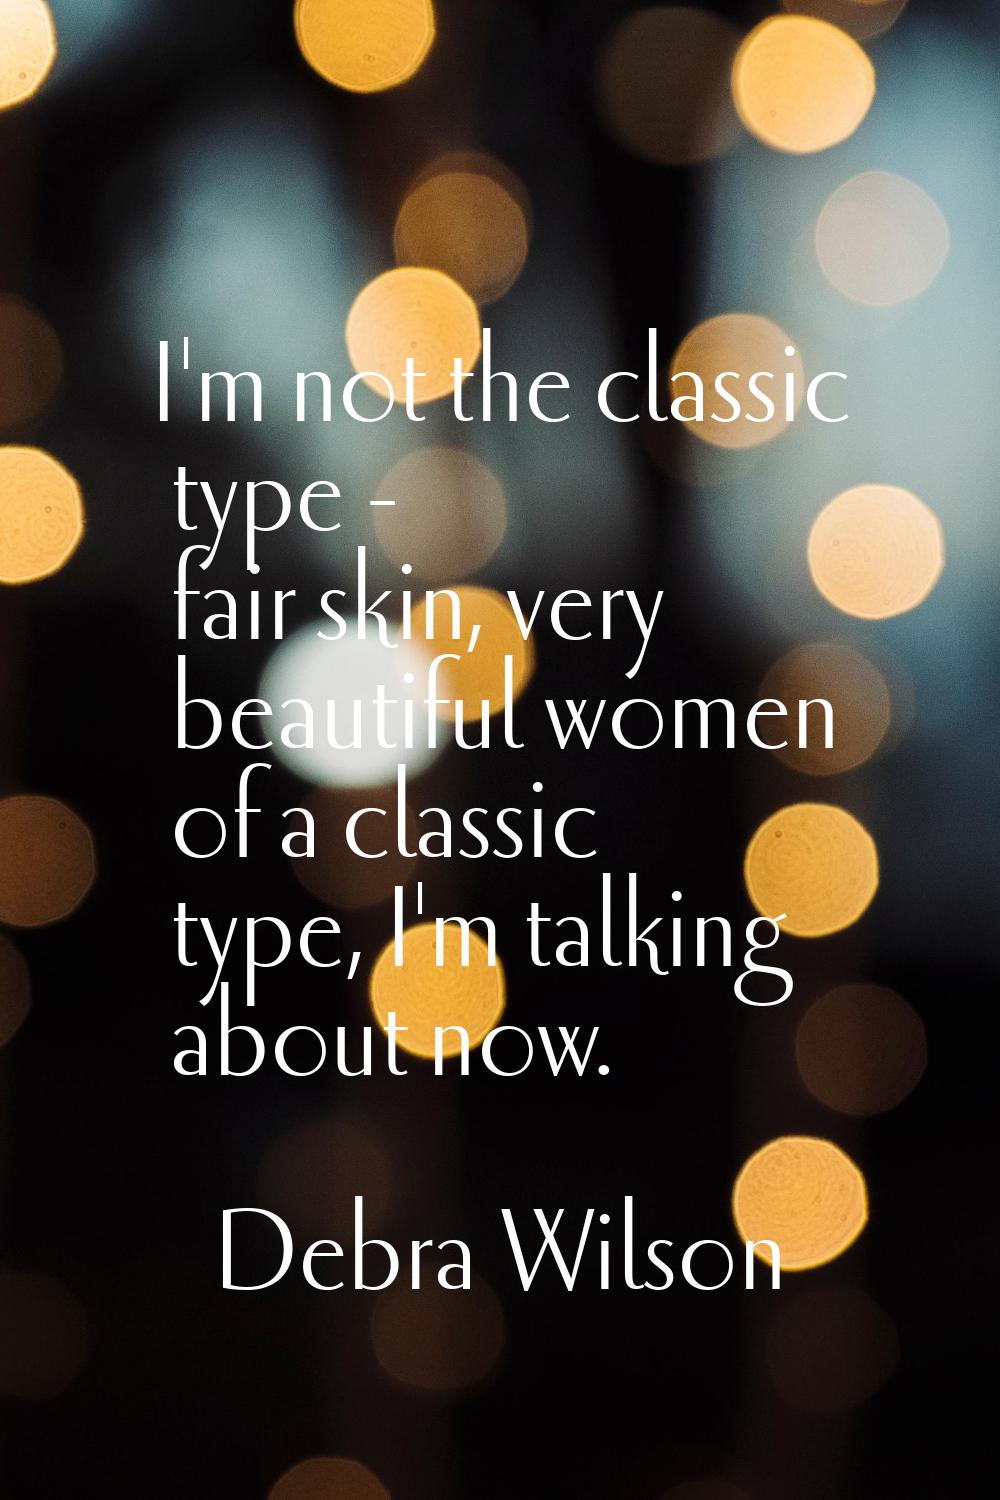 I'm not the classic type - fair skin, very beautiful women of a classic type, I'm talking about now